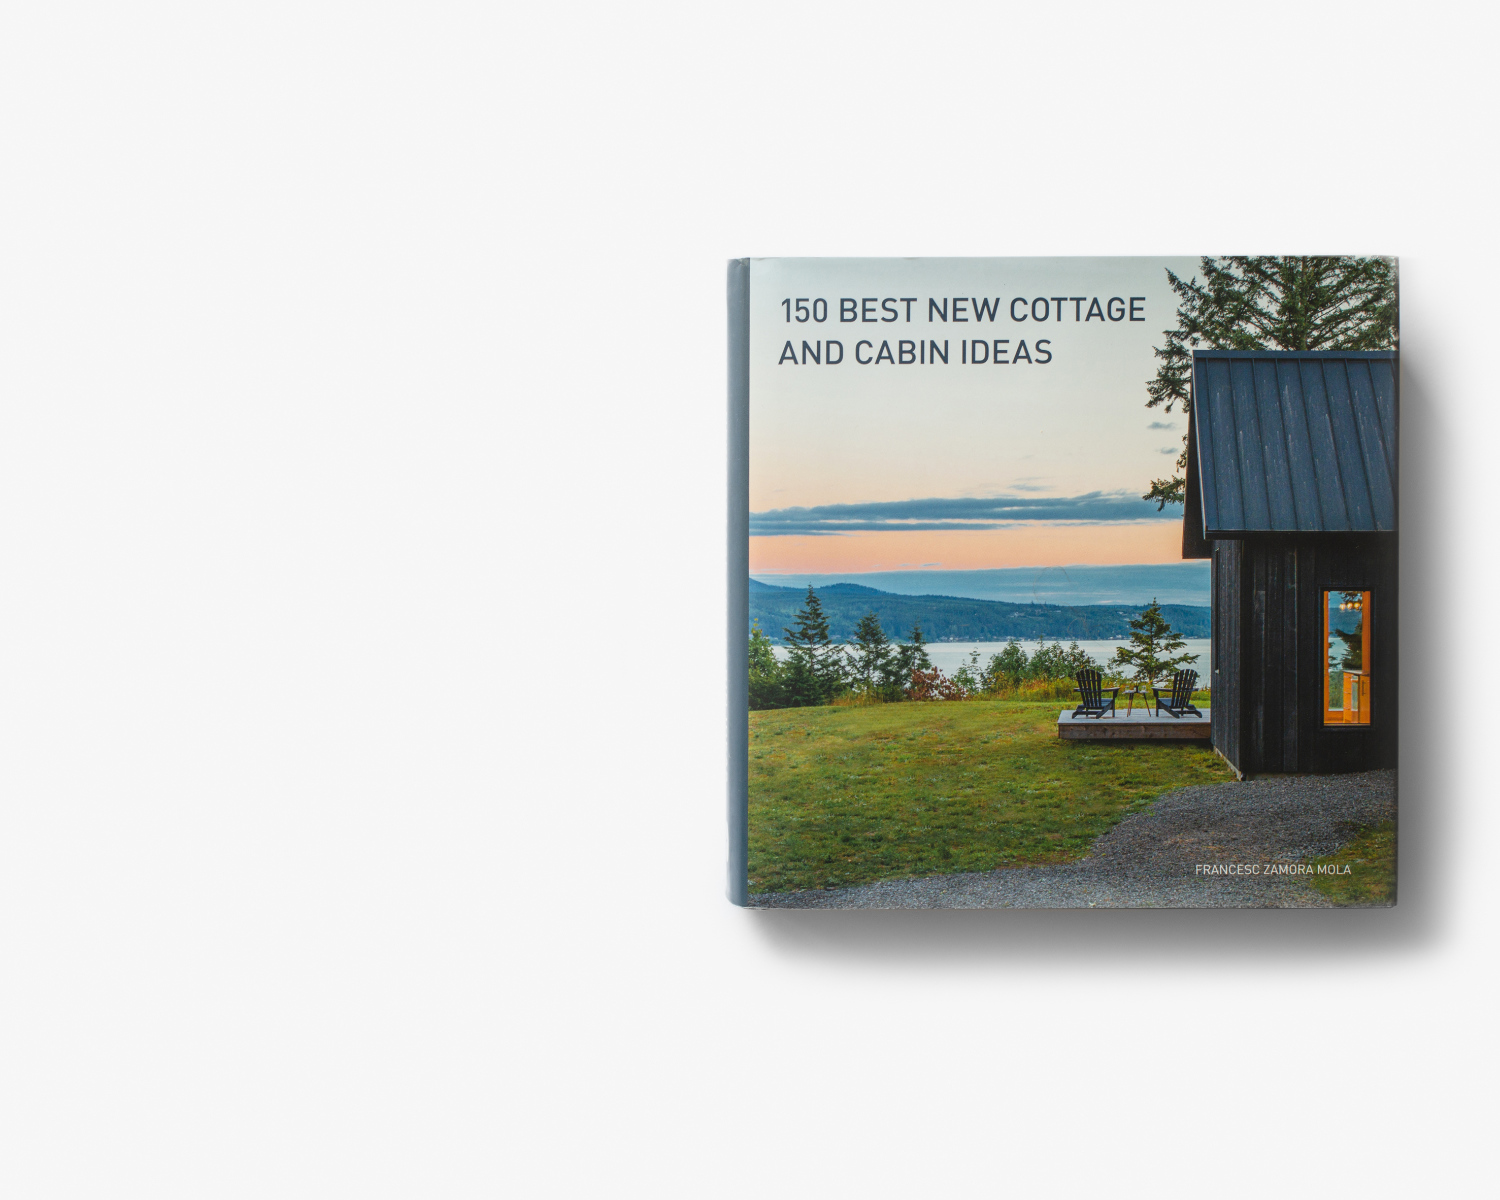 Birdseye Featured in “150 Best New Cottage and Cabin Ideas” Book